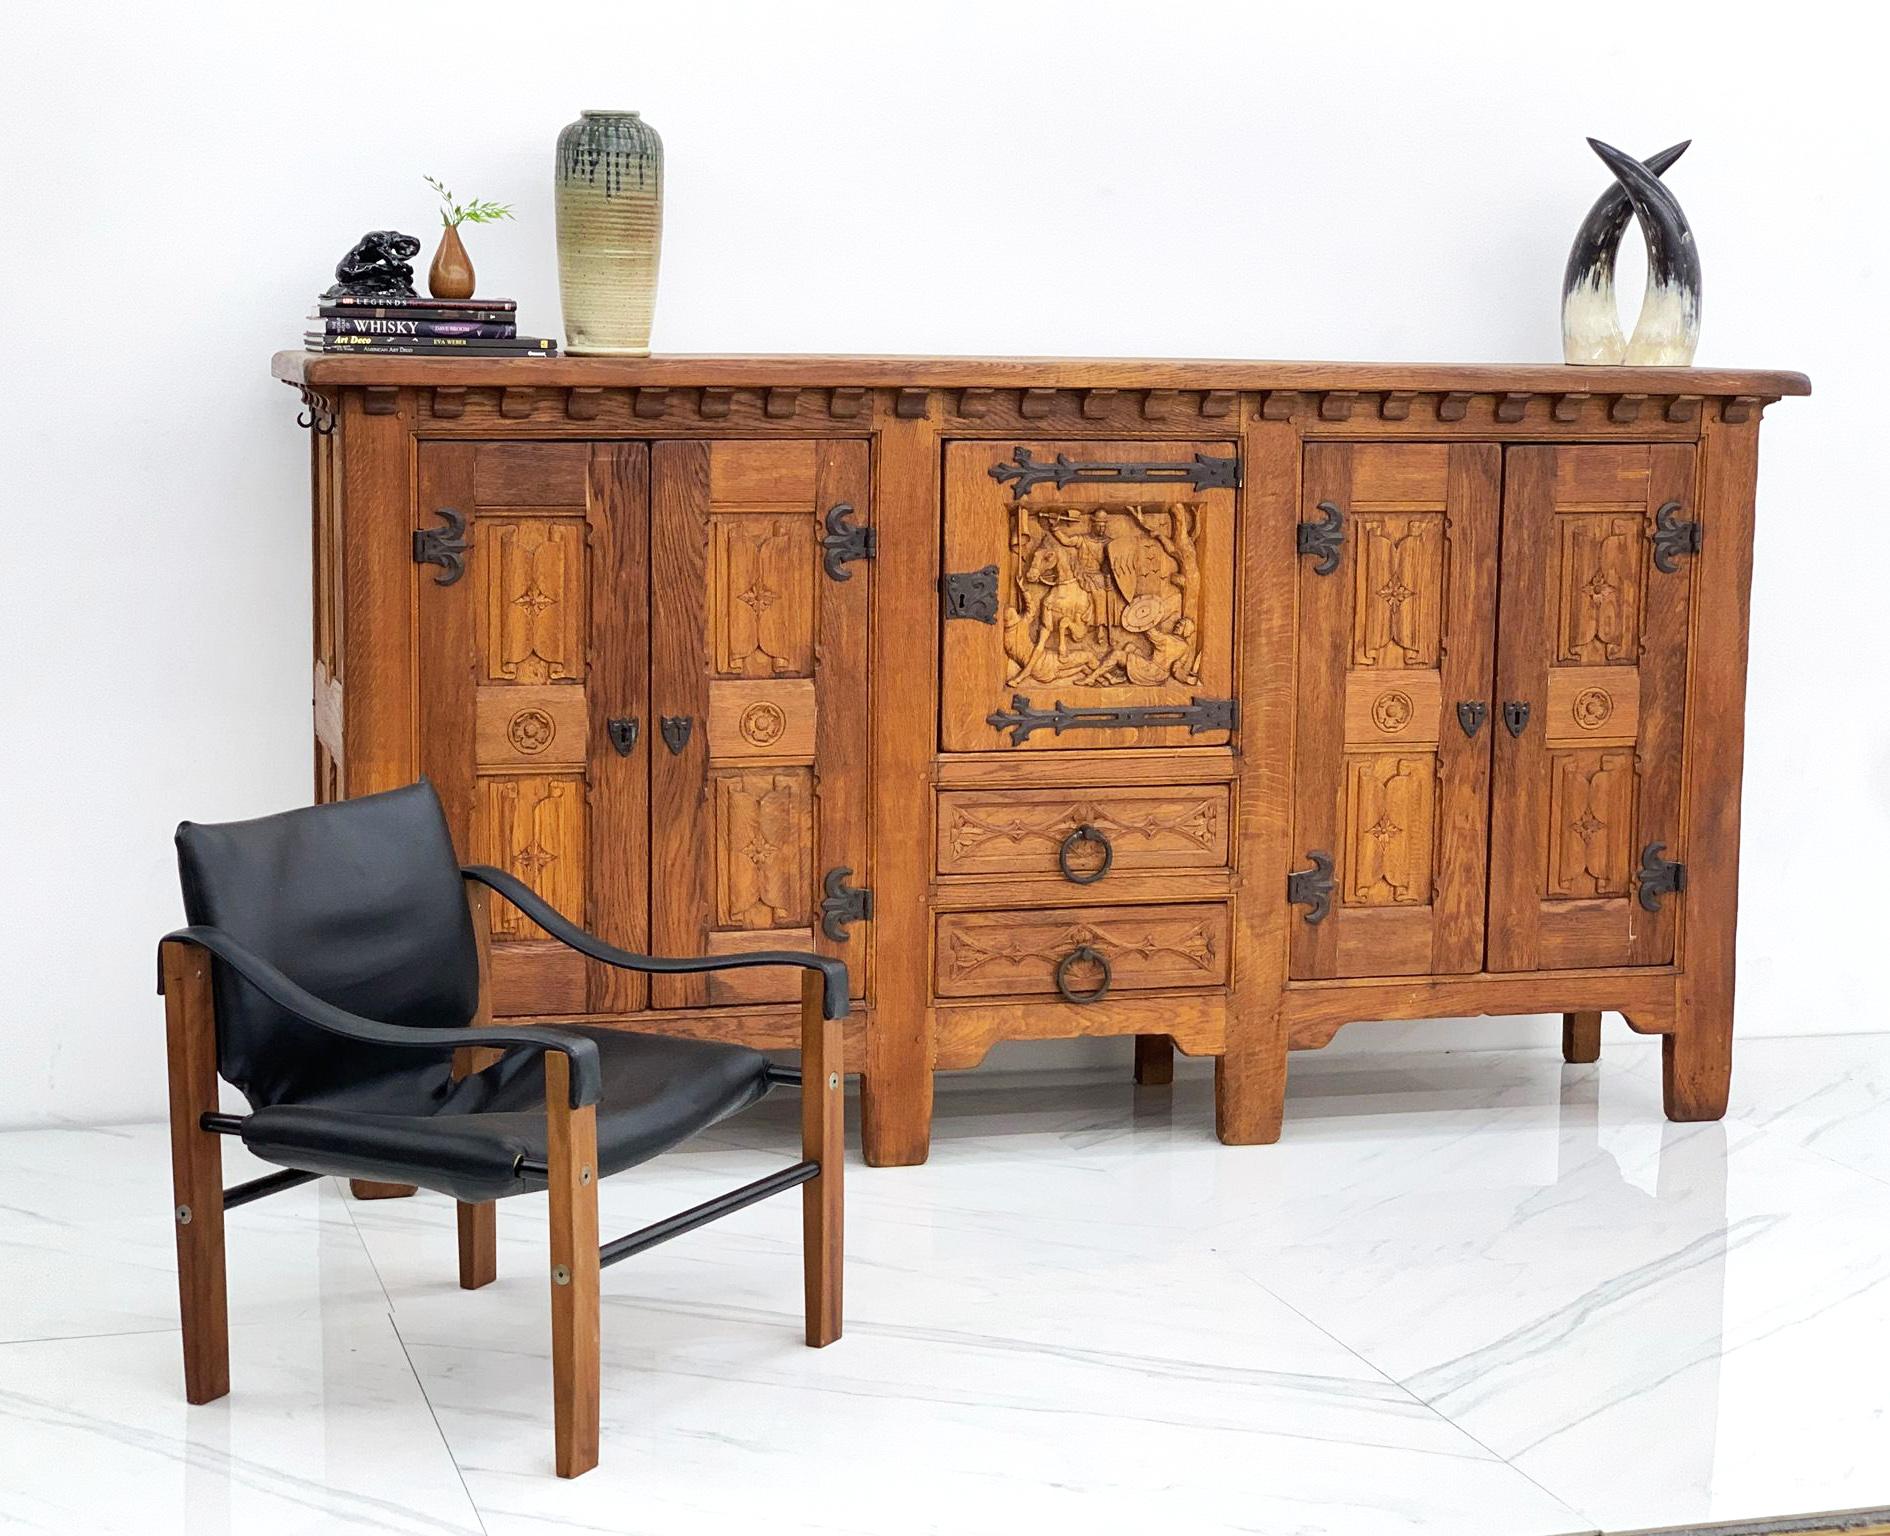 This piece is both monumental and stunning, this fabulous oak buffet is made of solid oak through and through. (This piece is legit solid wood, including the back, and the joinery / attention to wood detail is incredible-- such a craftsman